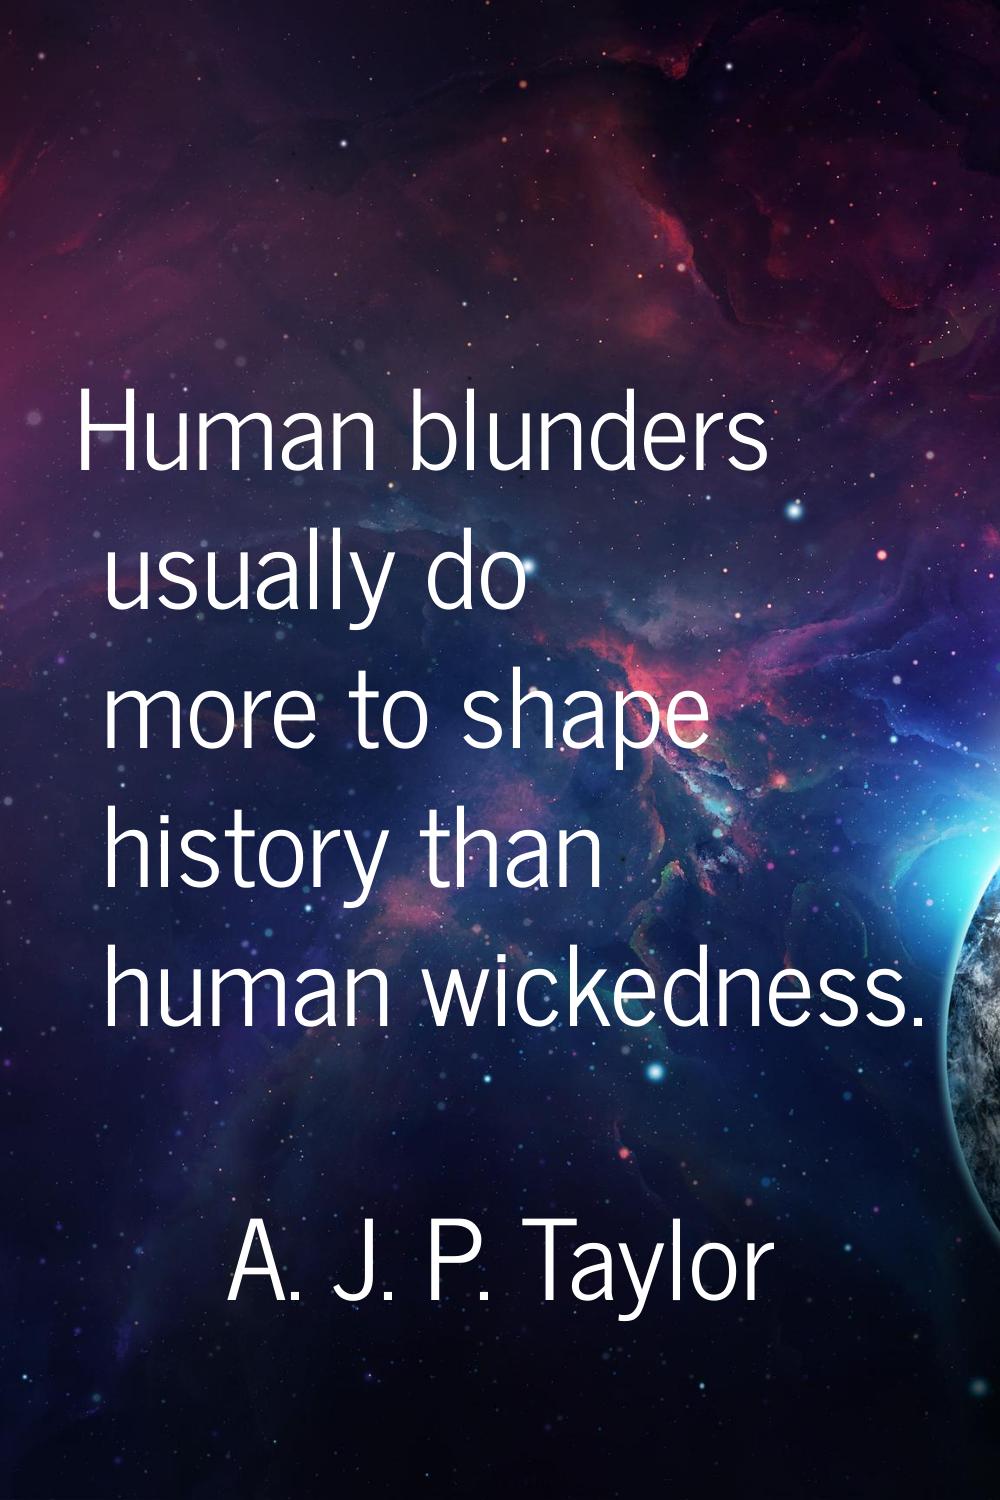 Human blunders usually do more to shape history than human wickedness.